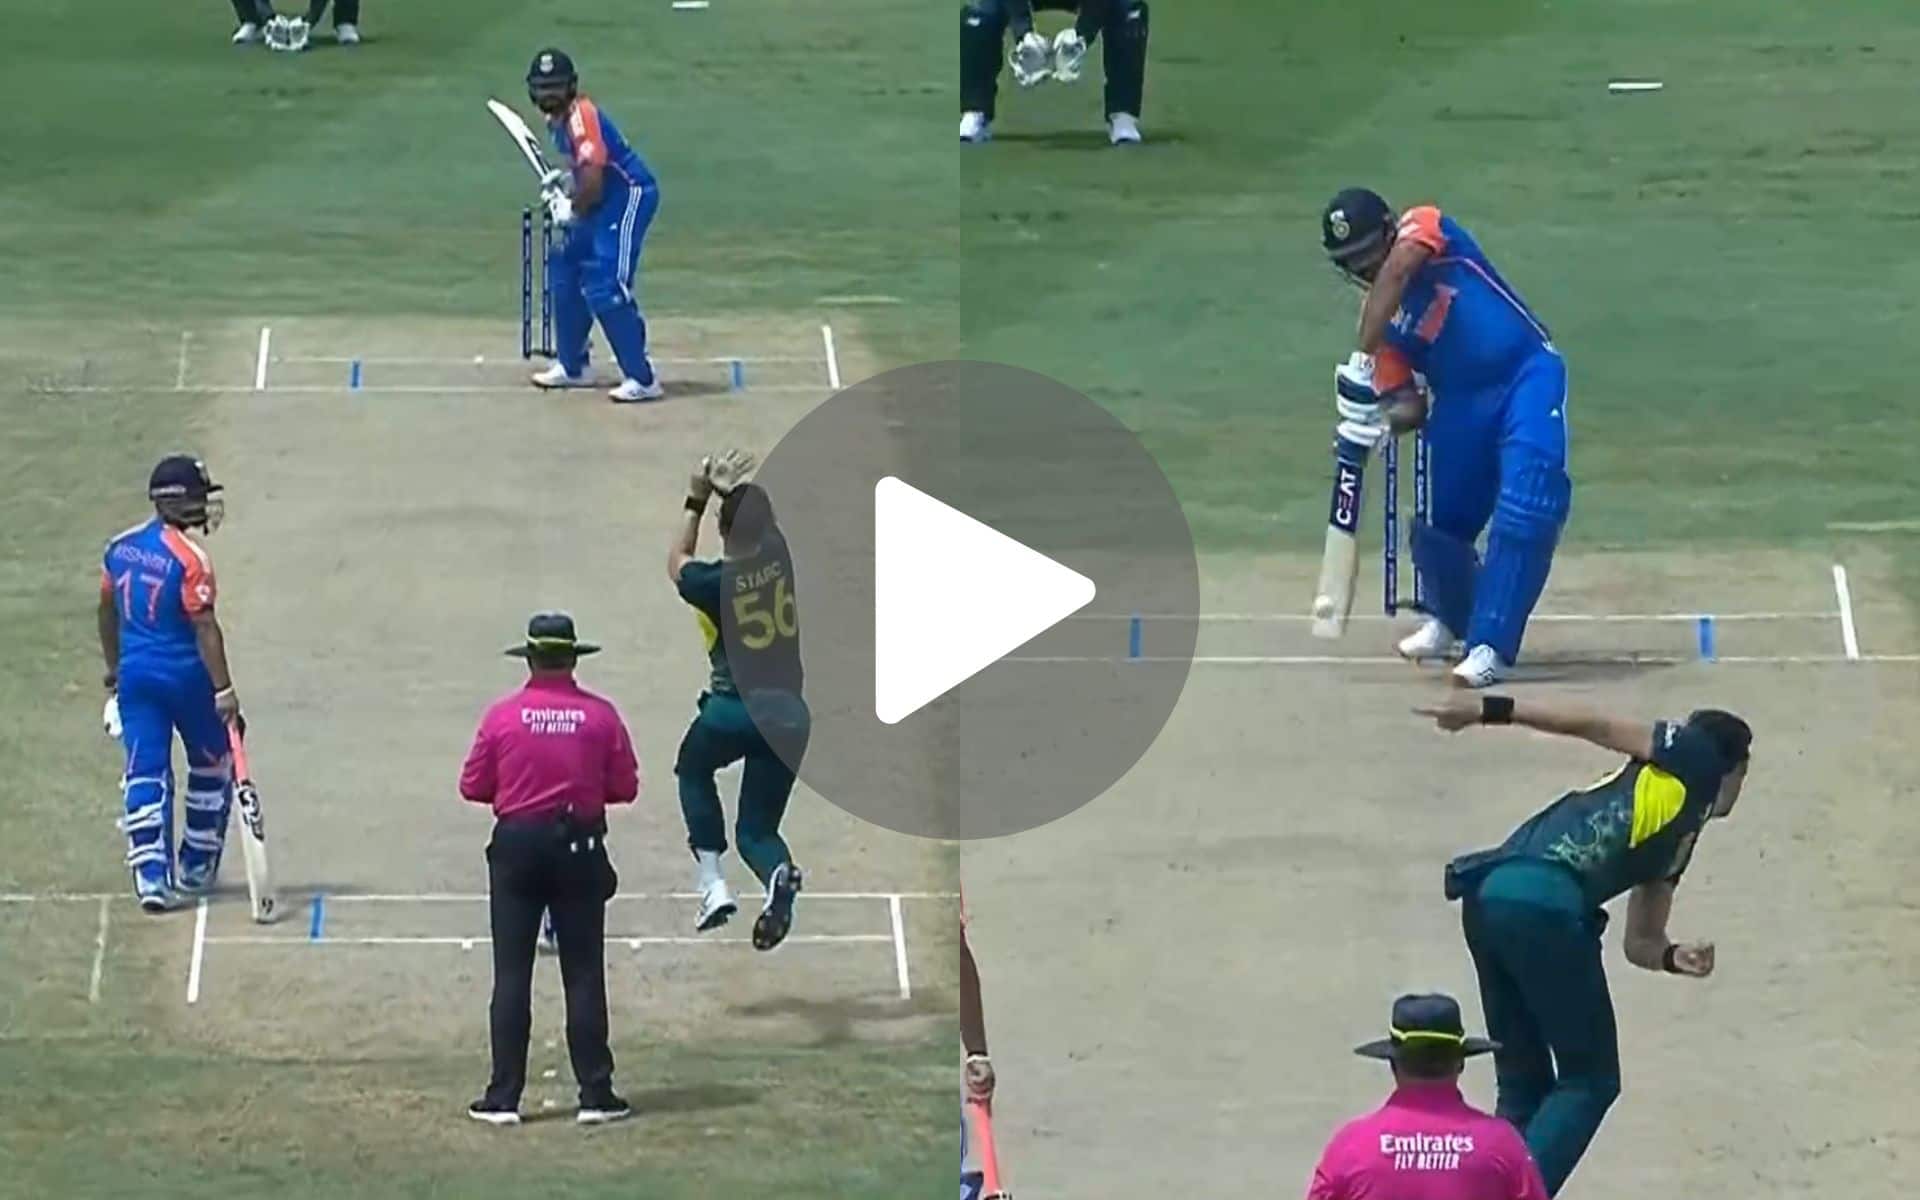 [Watch] 6, 6, 4, 6, 6 - Rohit Sharma 'Outmuscles' Mitchell Starc With A 29-Run Over